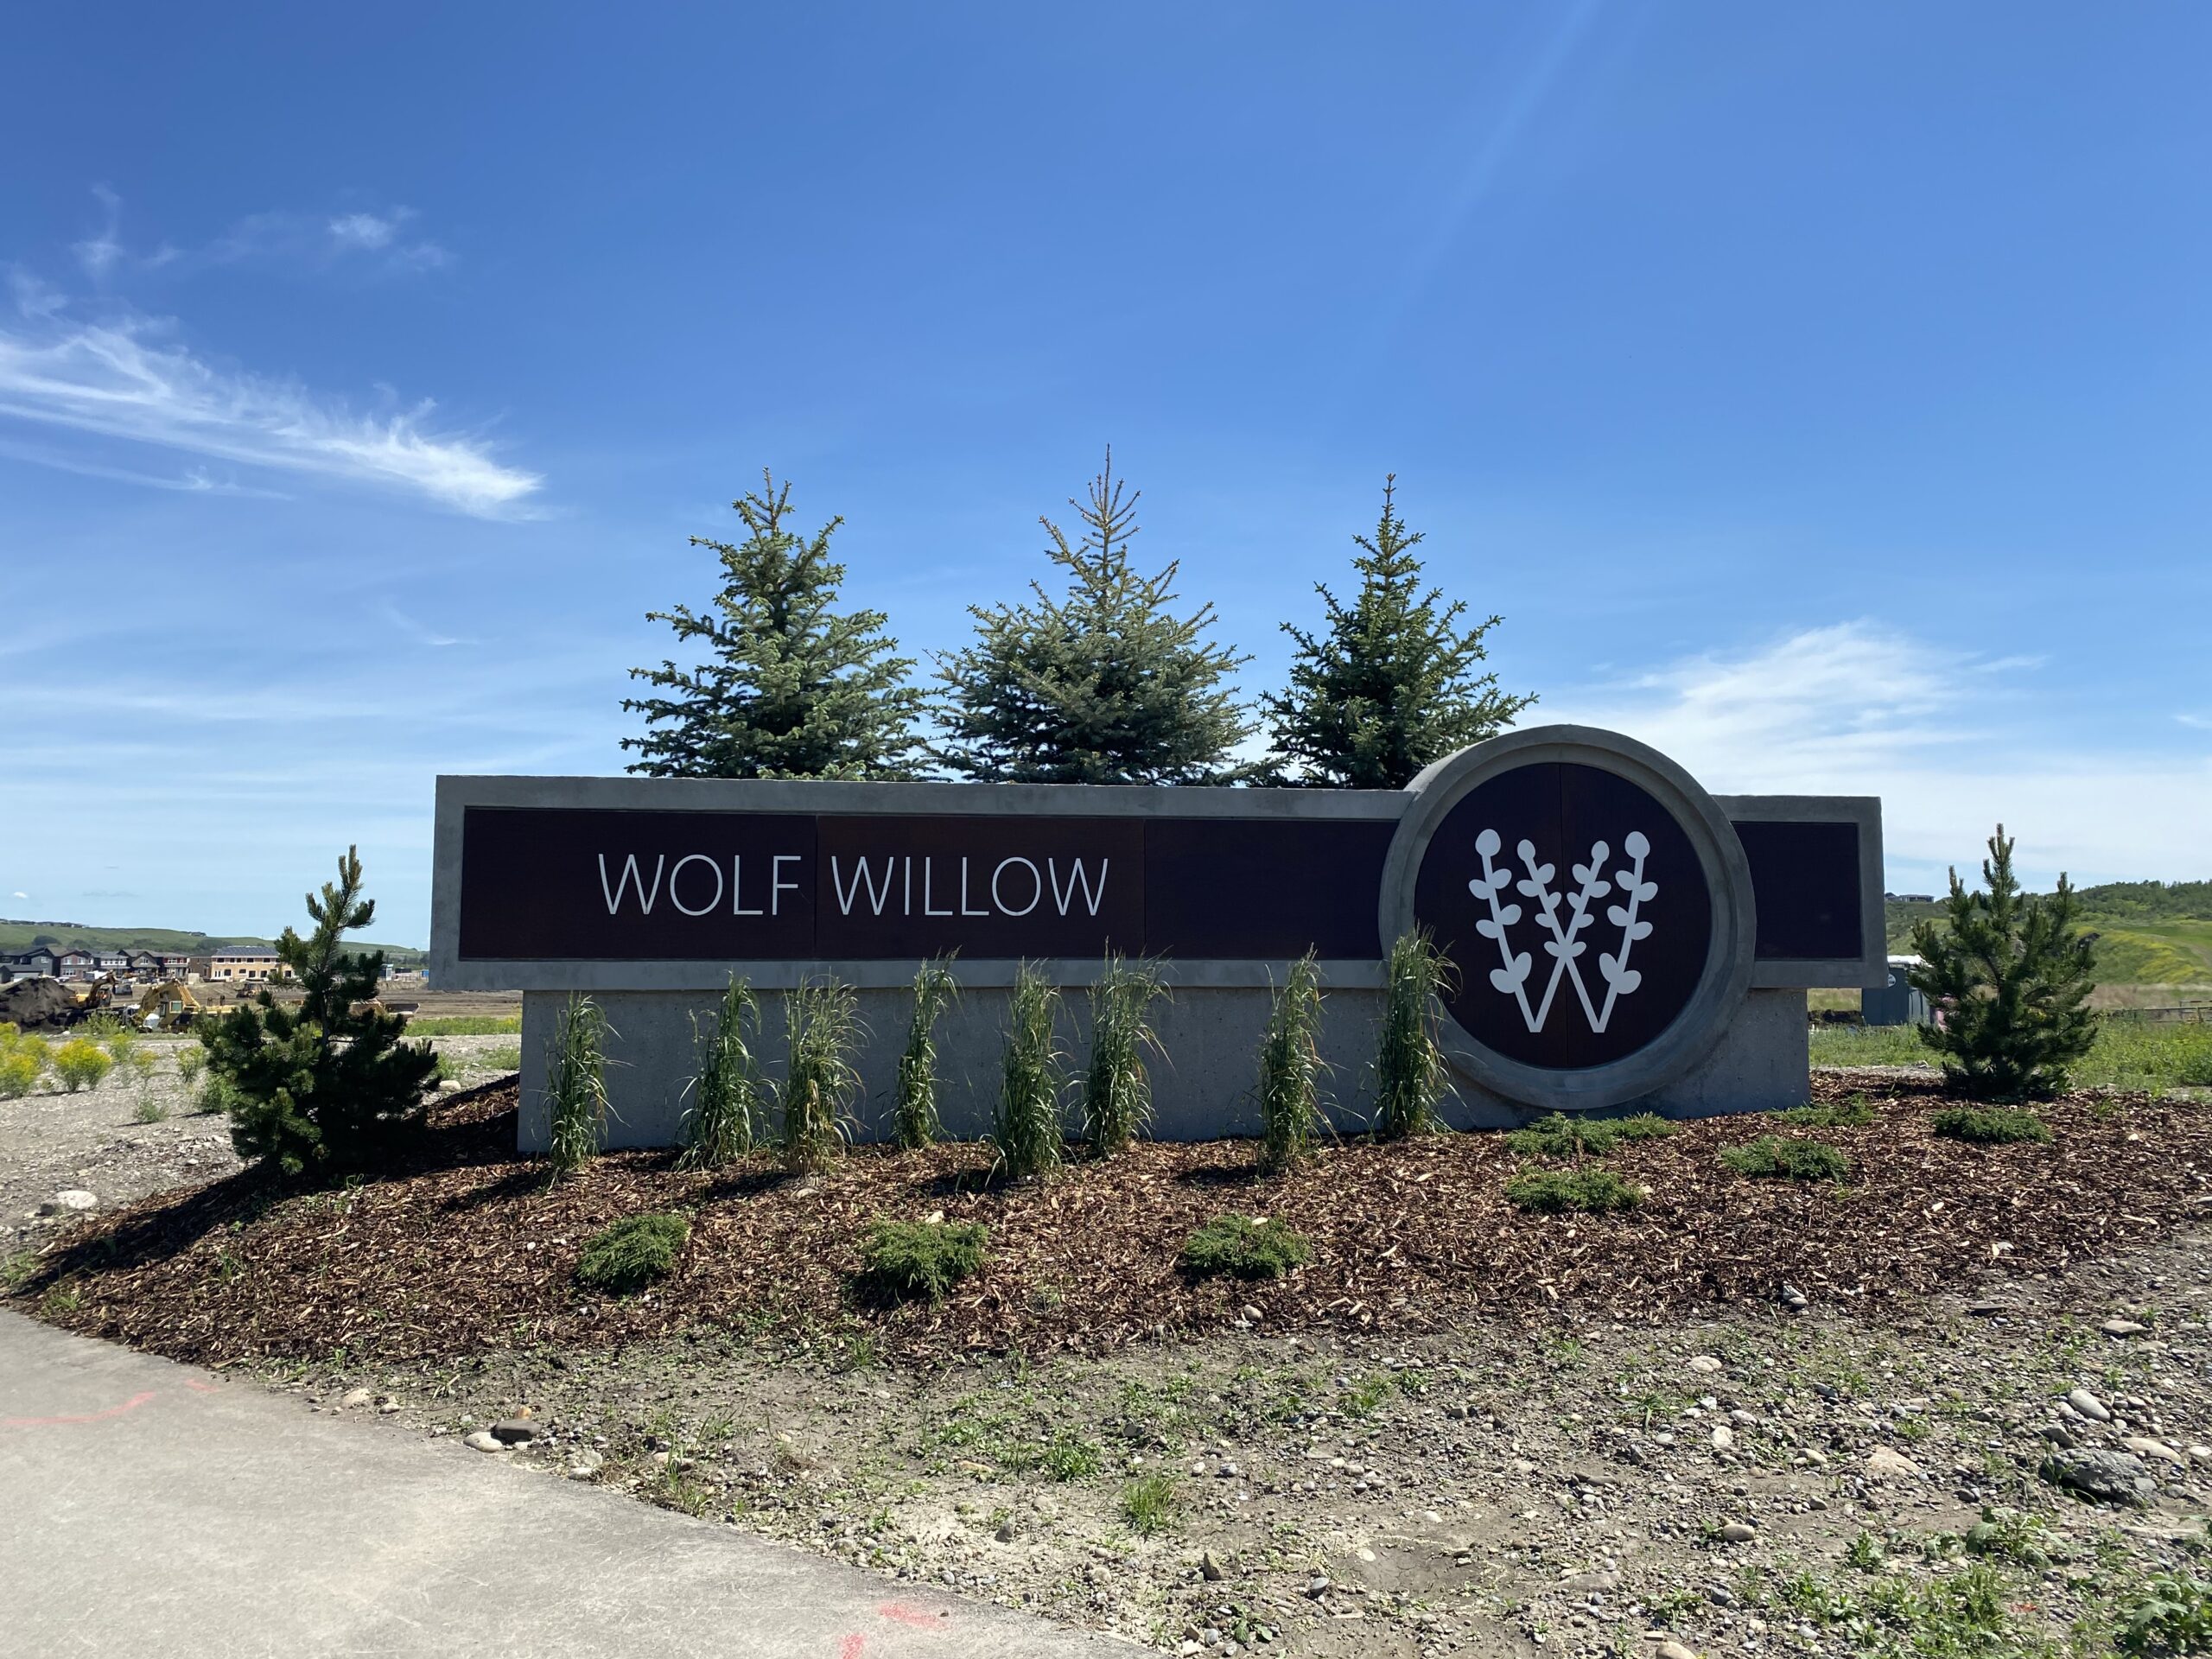 A concrete sign of the Wolf Willow logo and wordmark.